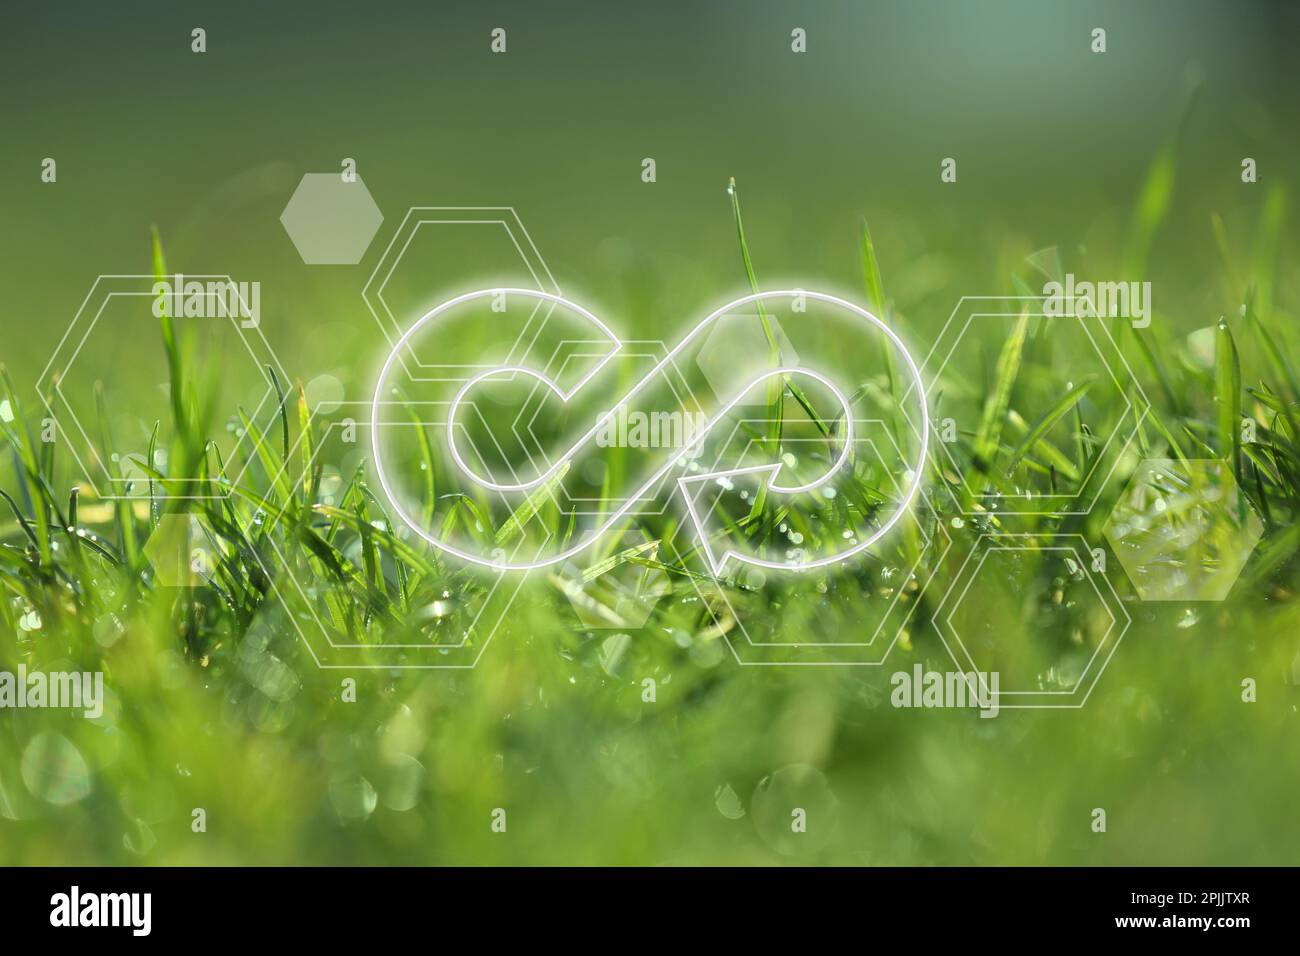 Circular economy concept. Green grass with dew and illustration of infinity symbol Stock Photo